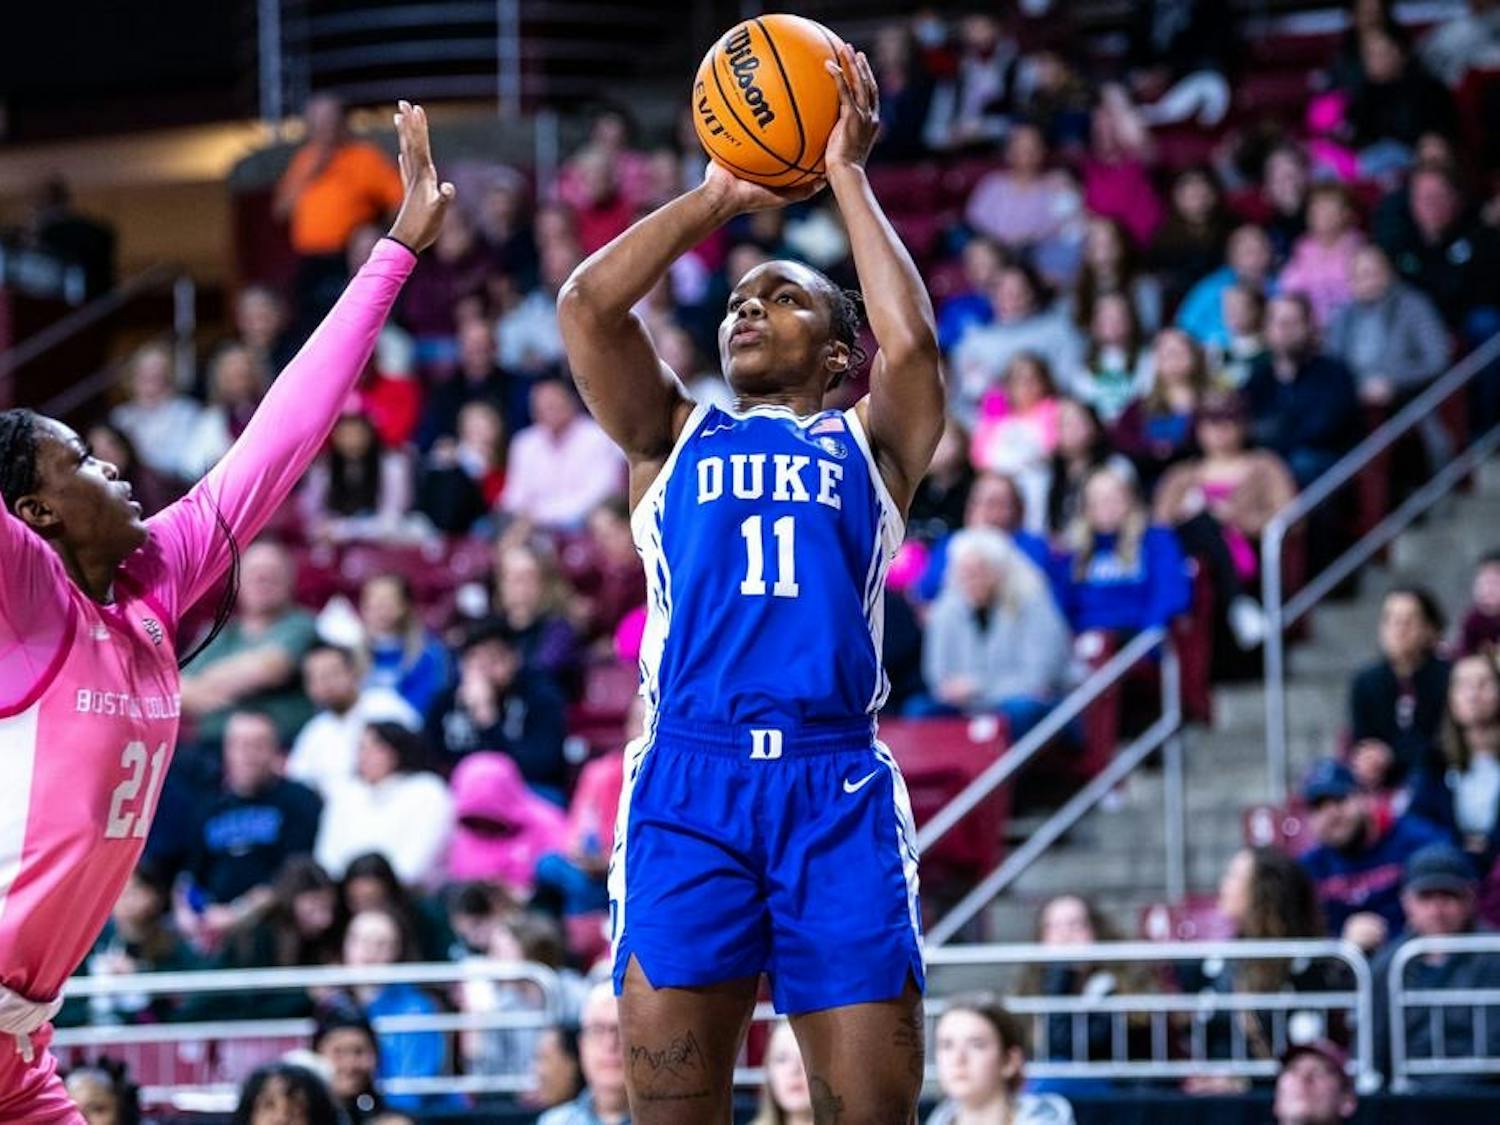 Jordyn Oliver (11) tied a season-high with 10 points in Duke's win at Boston College.